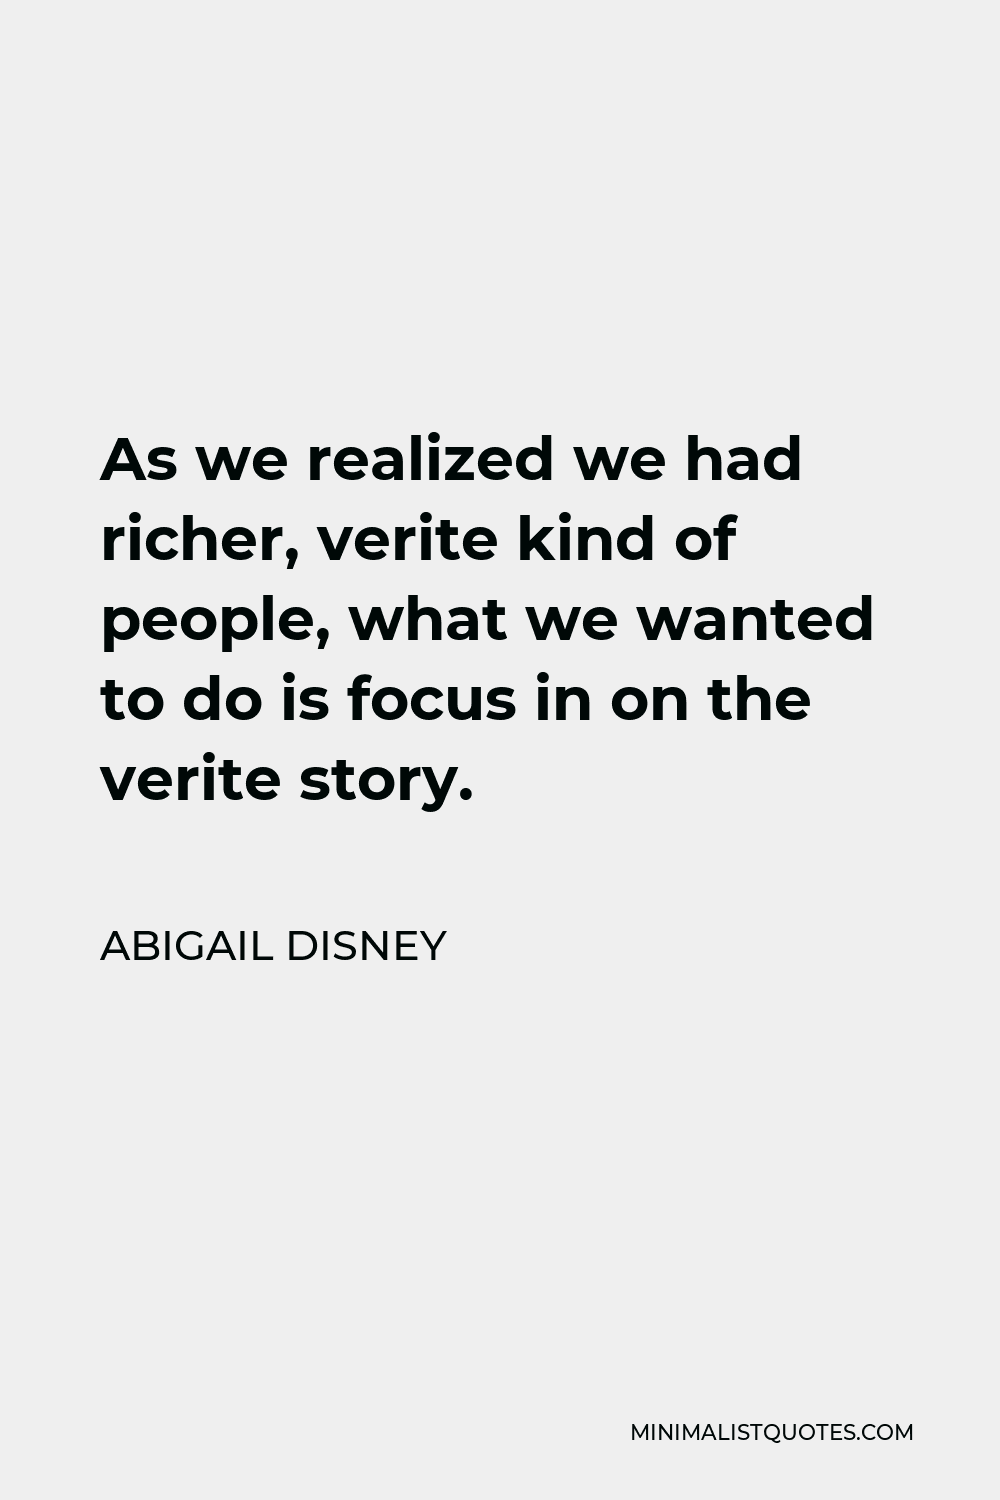 Abigail Disney Quote - As we realized we had richer, verite kind of people, what we wanted to do is focus in on the verite story.